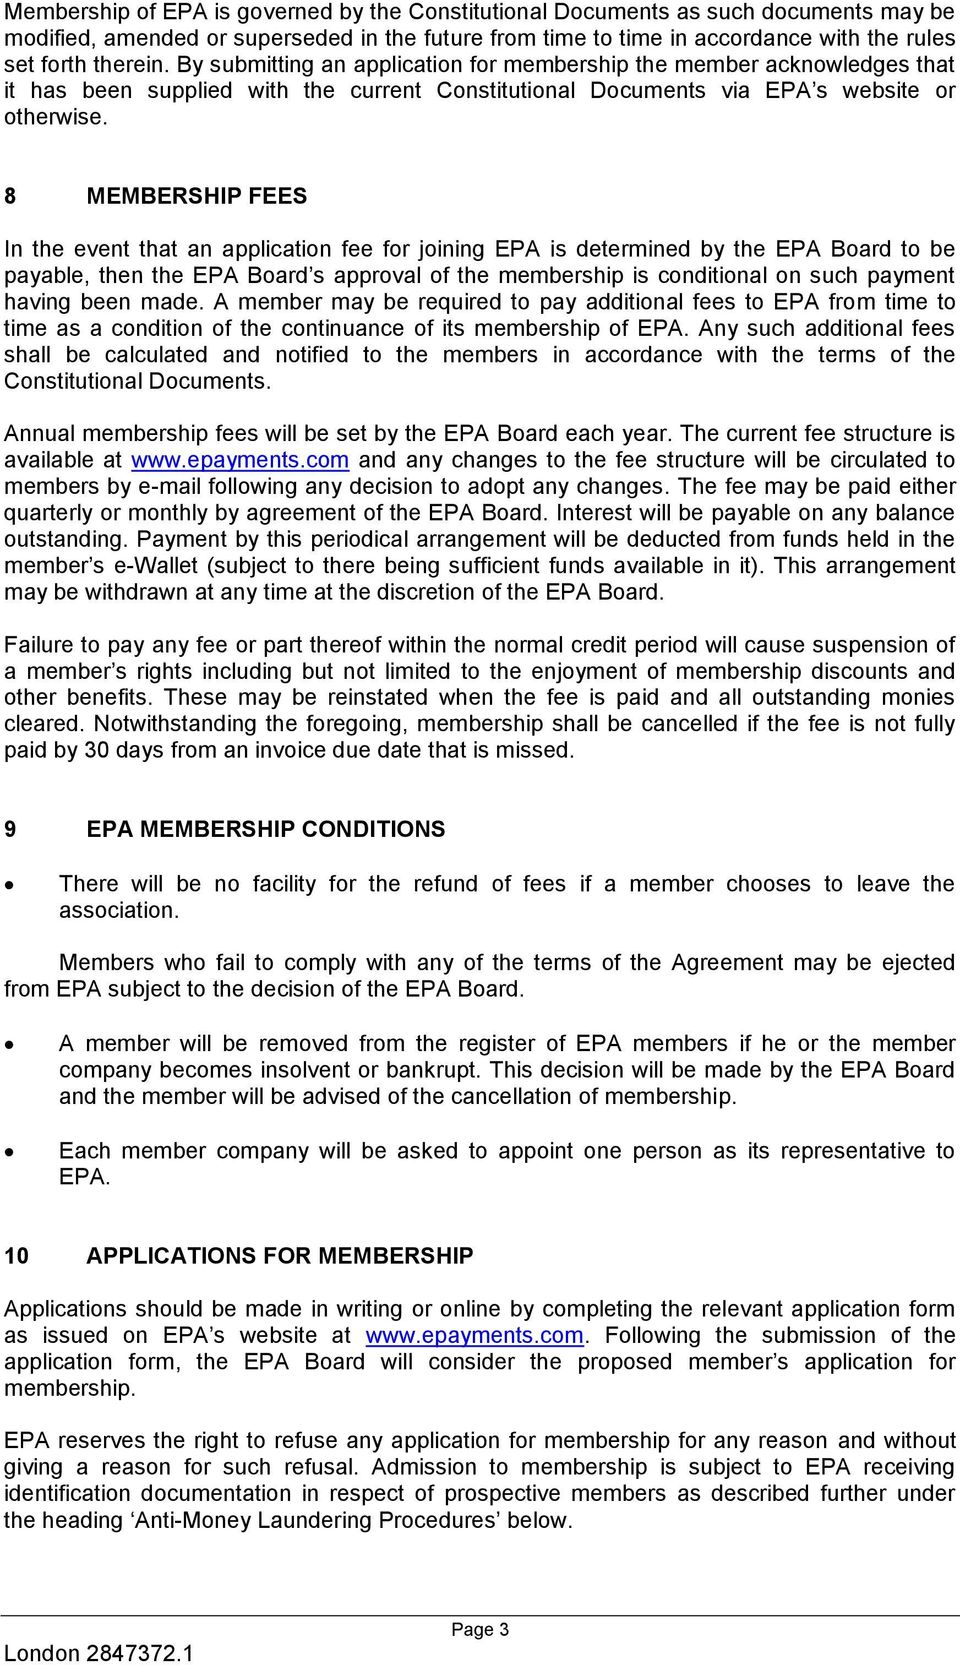 8 MEMBERSHIP FEES In the event that an application fee for joining EPA is determined by the EPA Board to be payable, then the EPA Board s approval of the membership is conditional on such payment